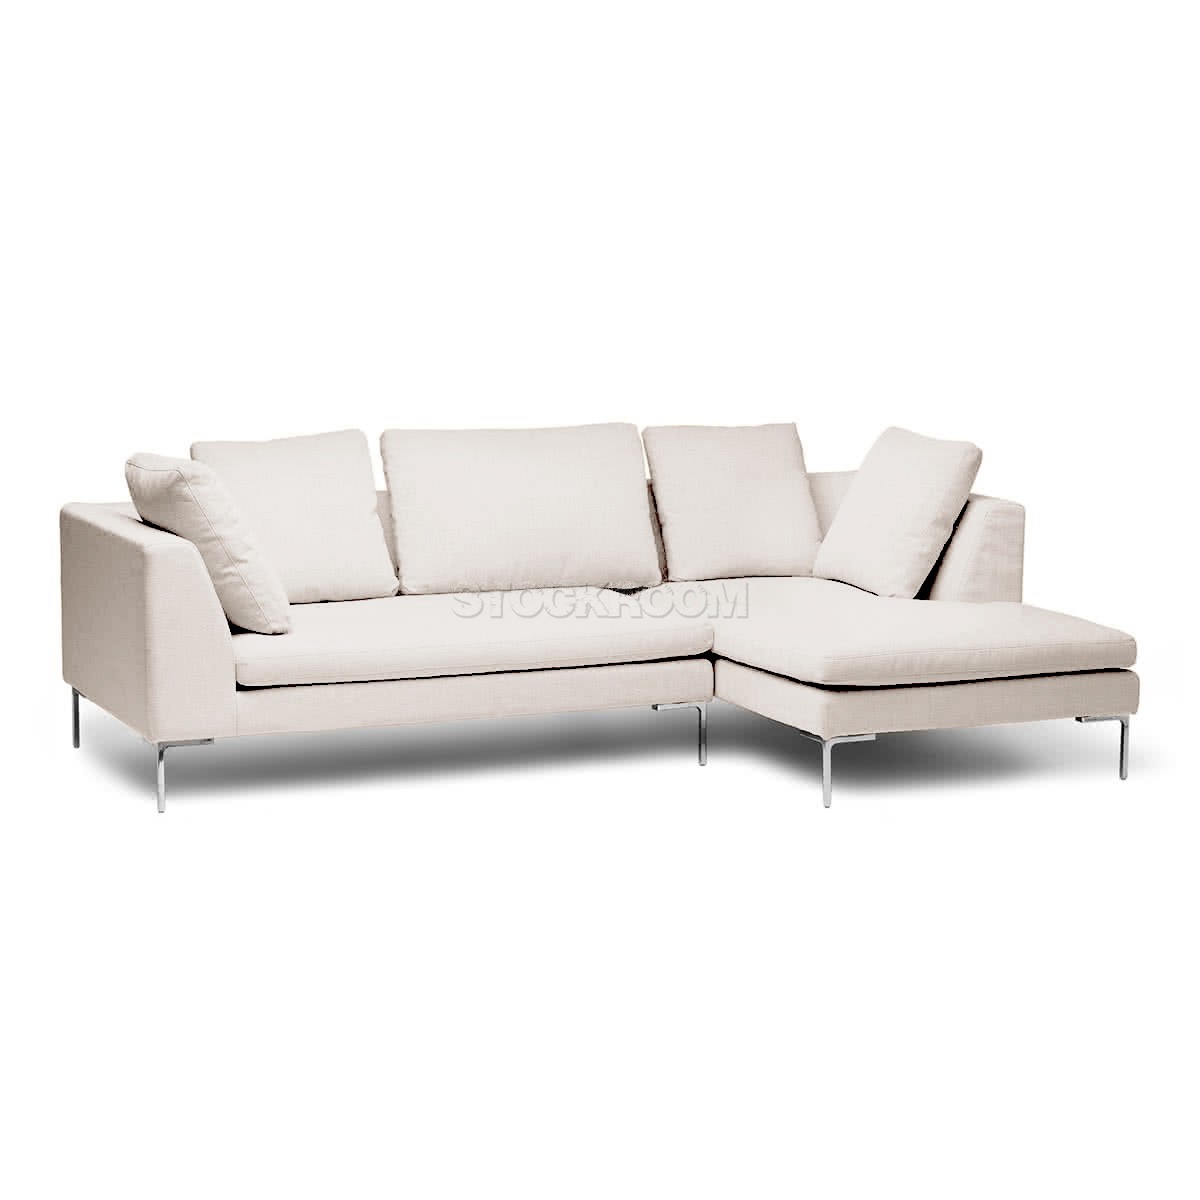 Domino Fabric Feather Down Sofa - L Shape / Sectional Sofa